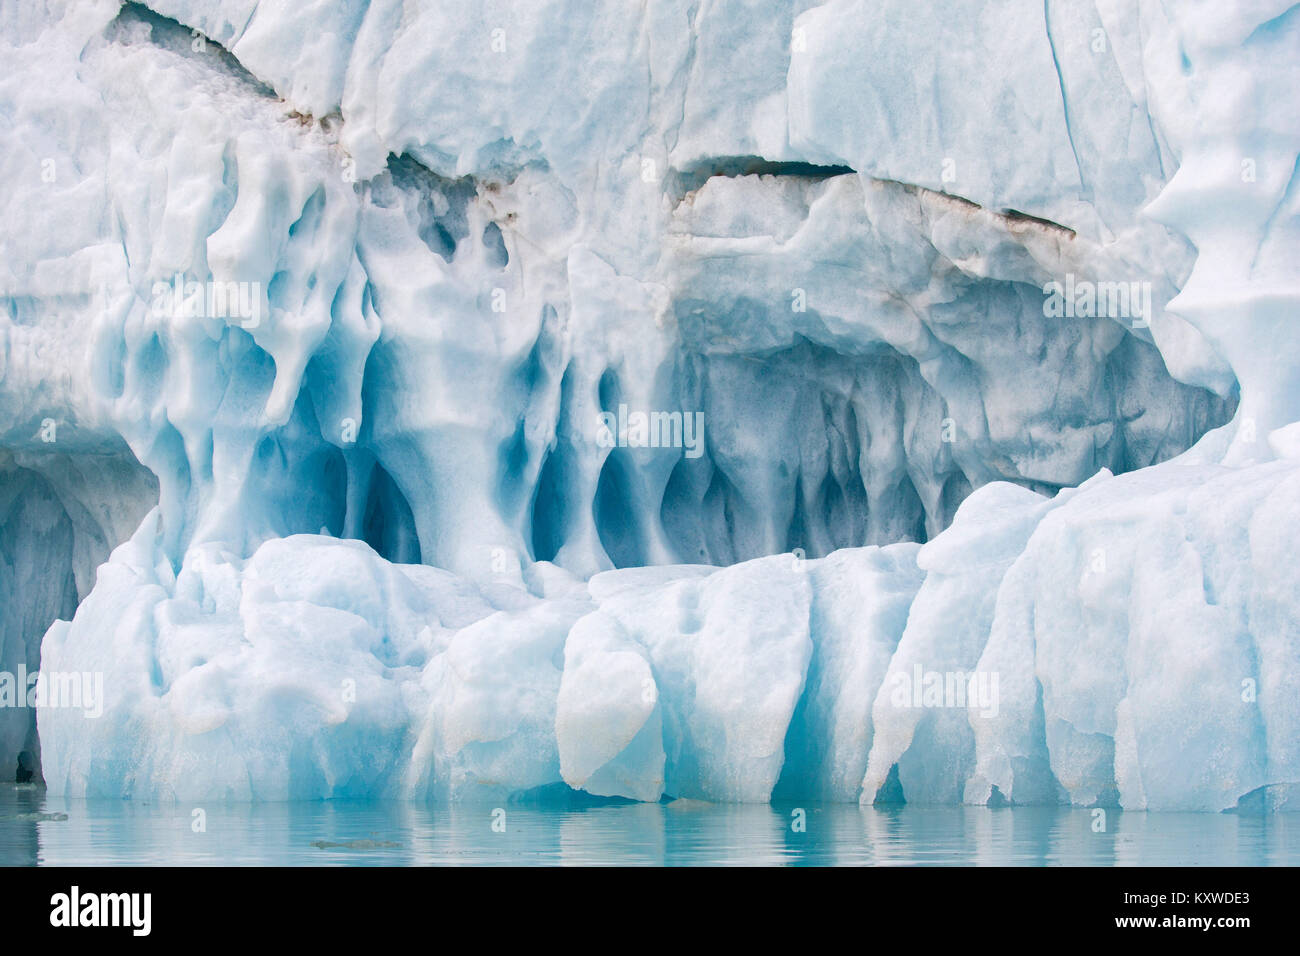 Ice structure of melting iceberg in the Arctic Ocean, Svalbard / Spitsbergen, Norway Stock Photo